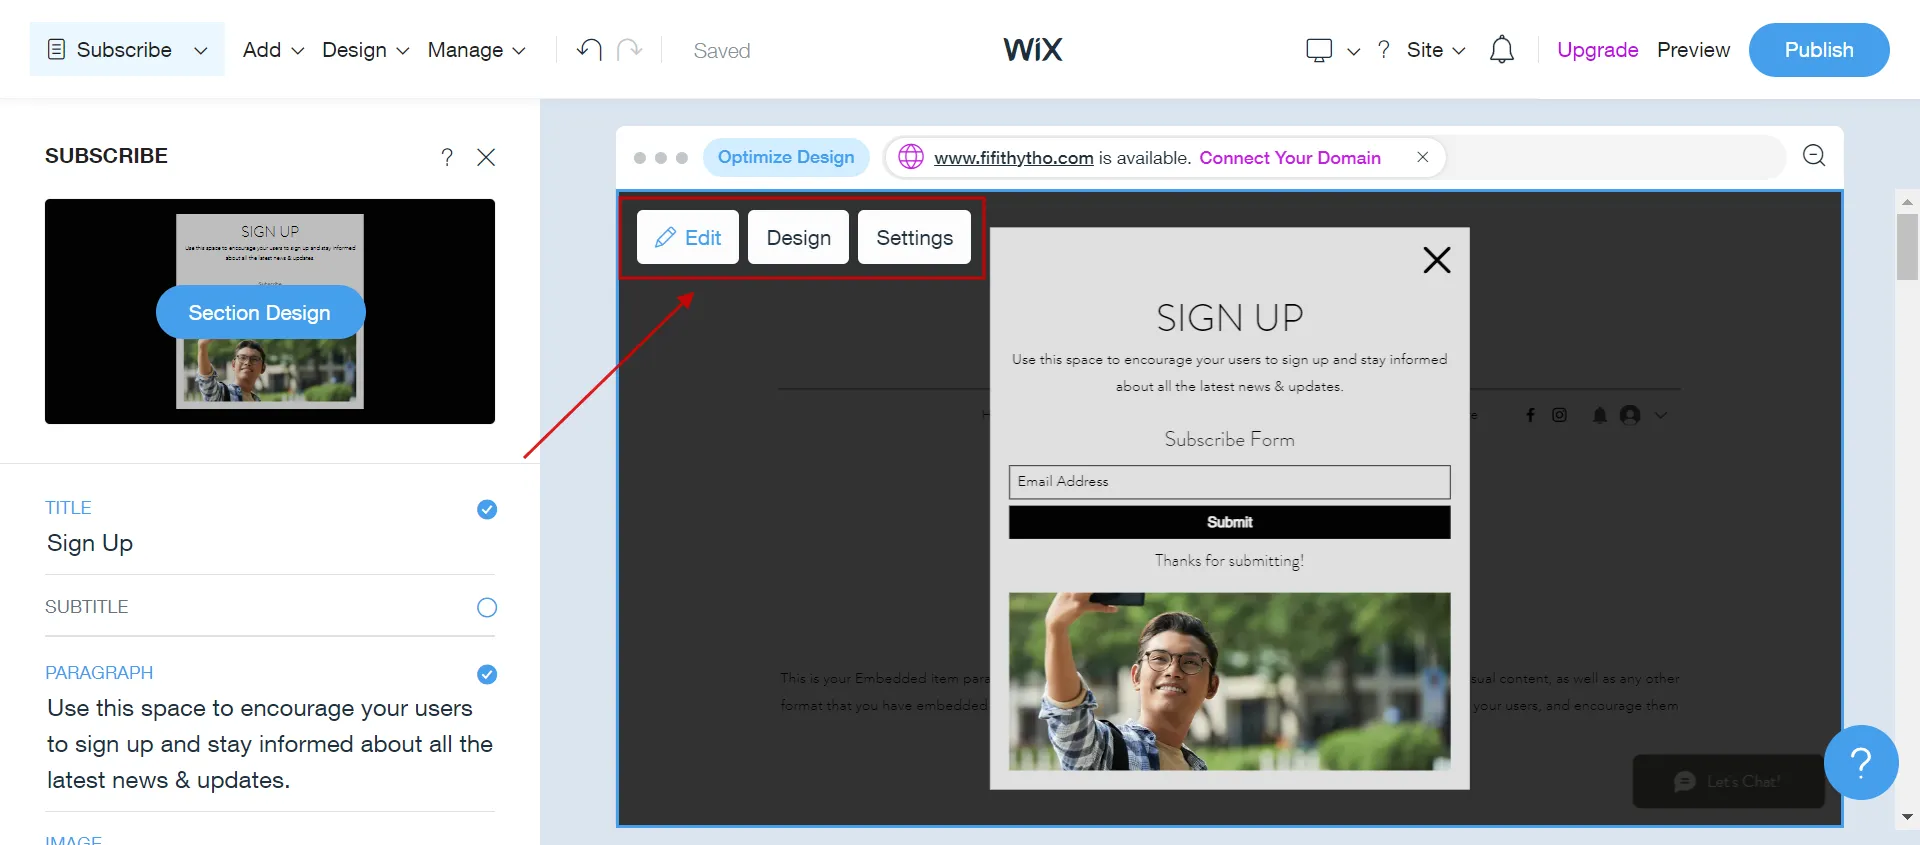 How to edit pop up on Wix